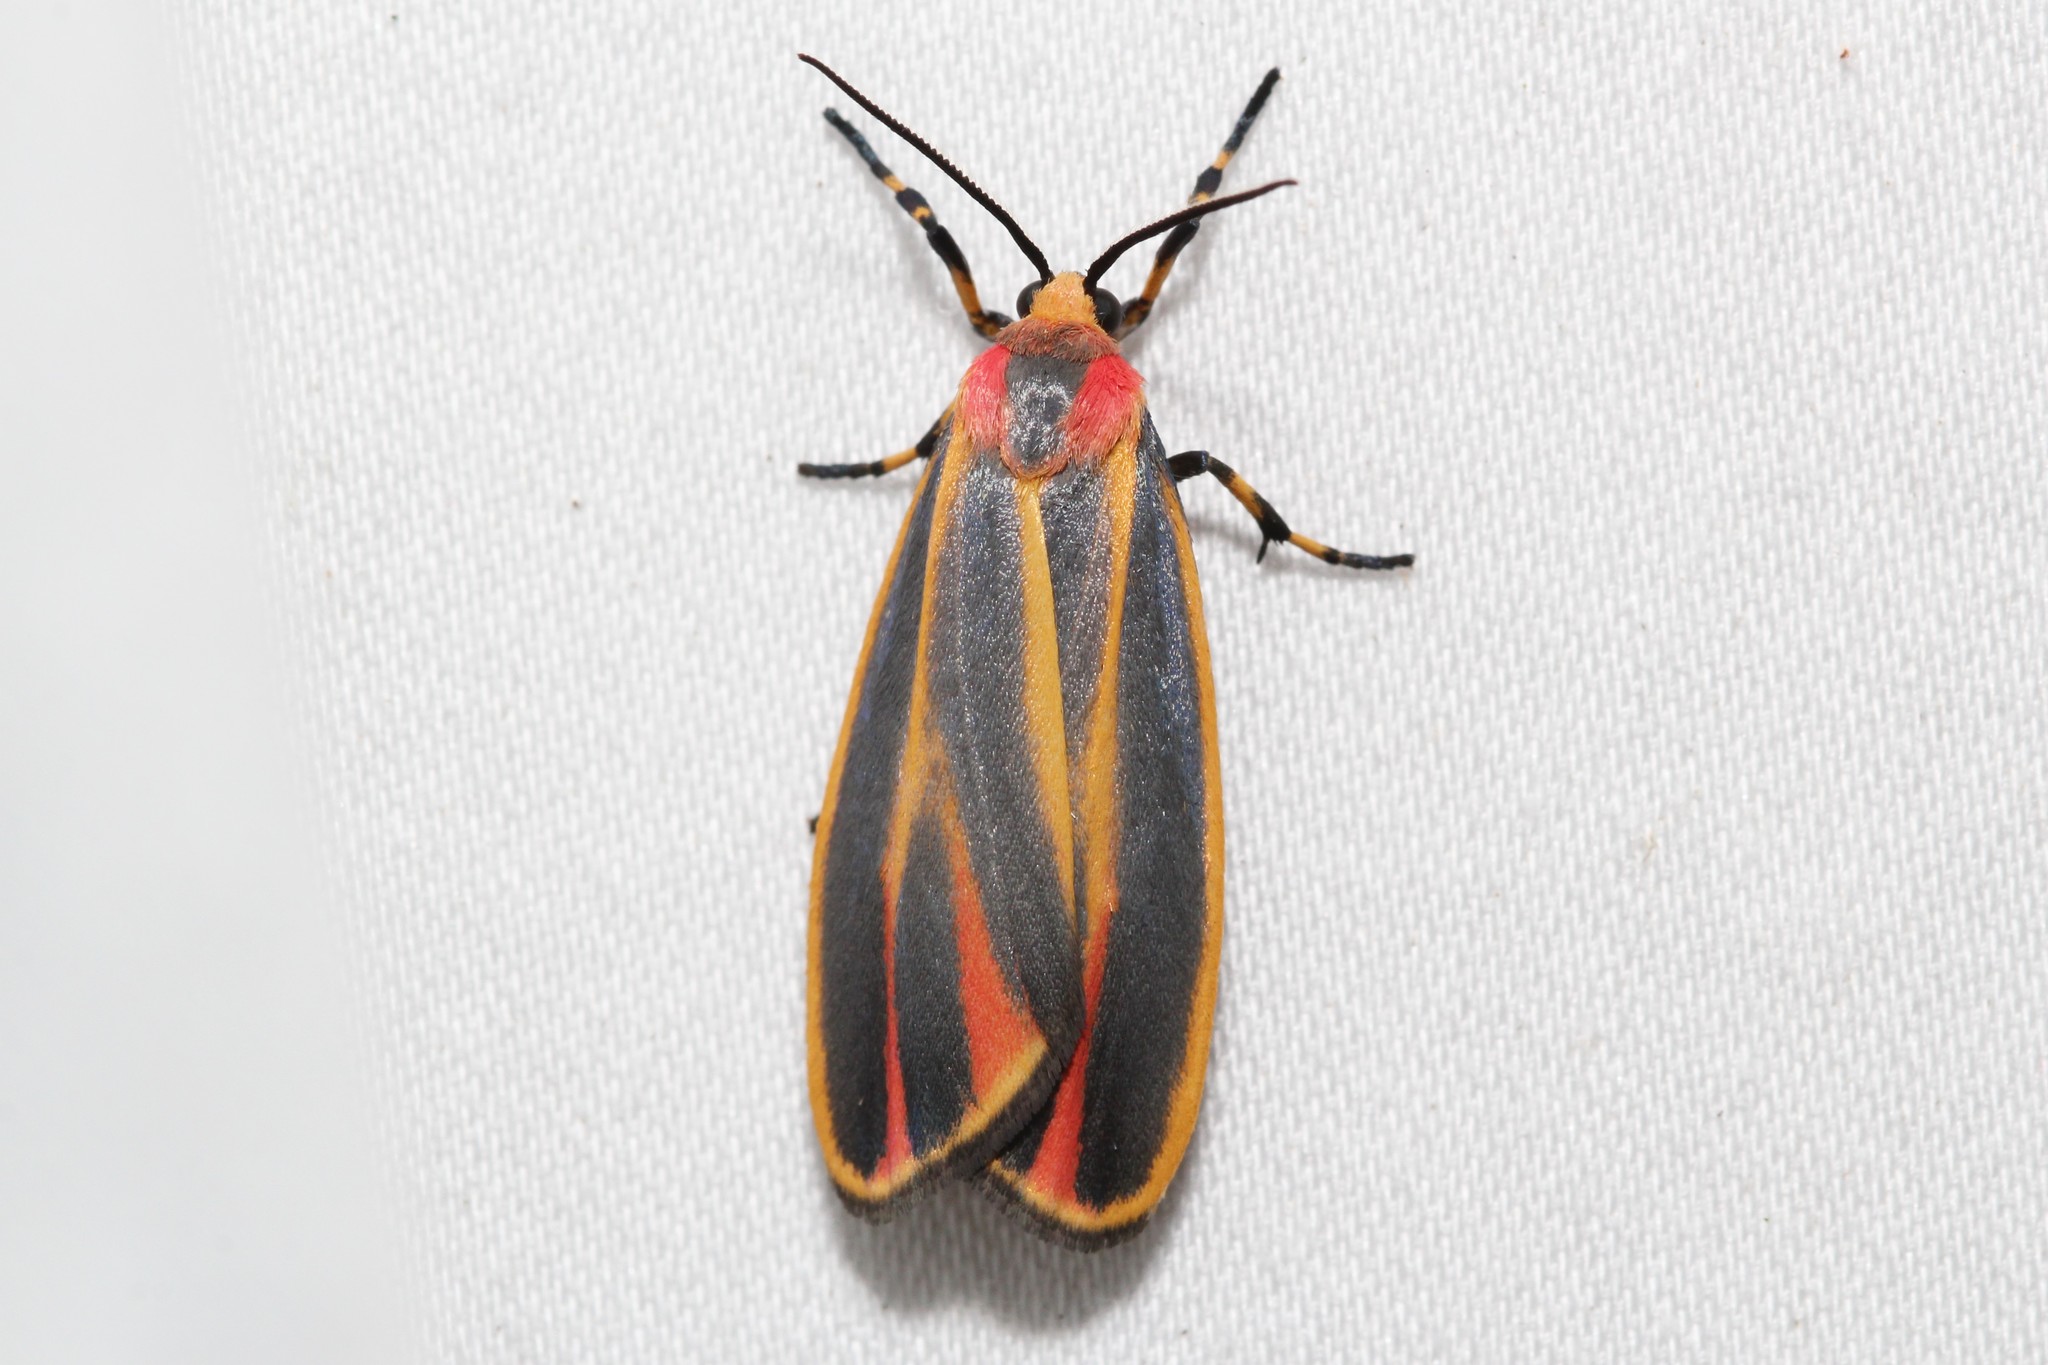 A smooth moth with red, orange and black striped wings, resting on a paper towel.